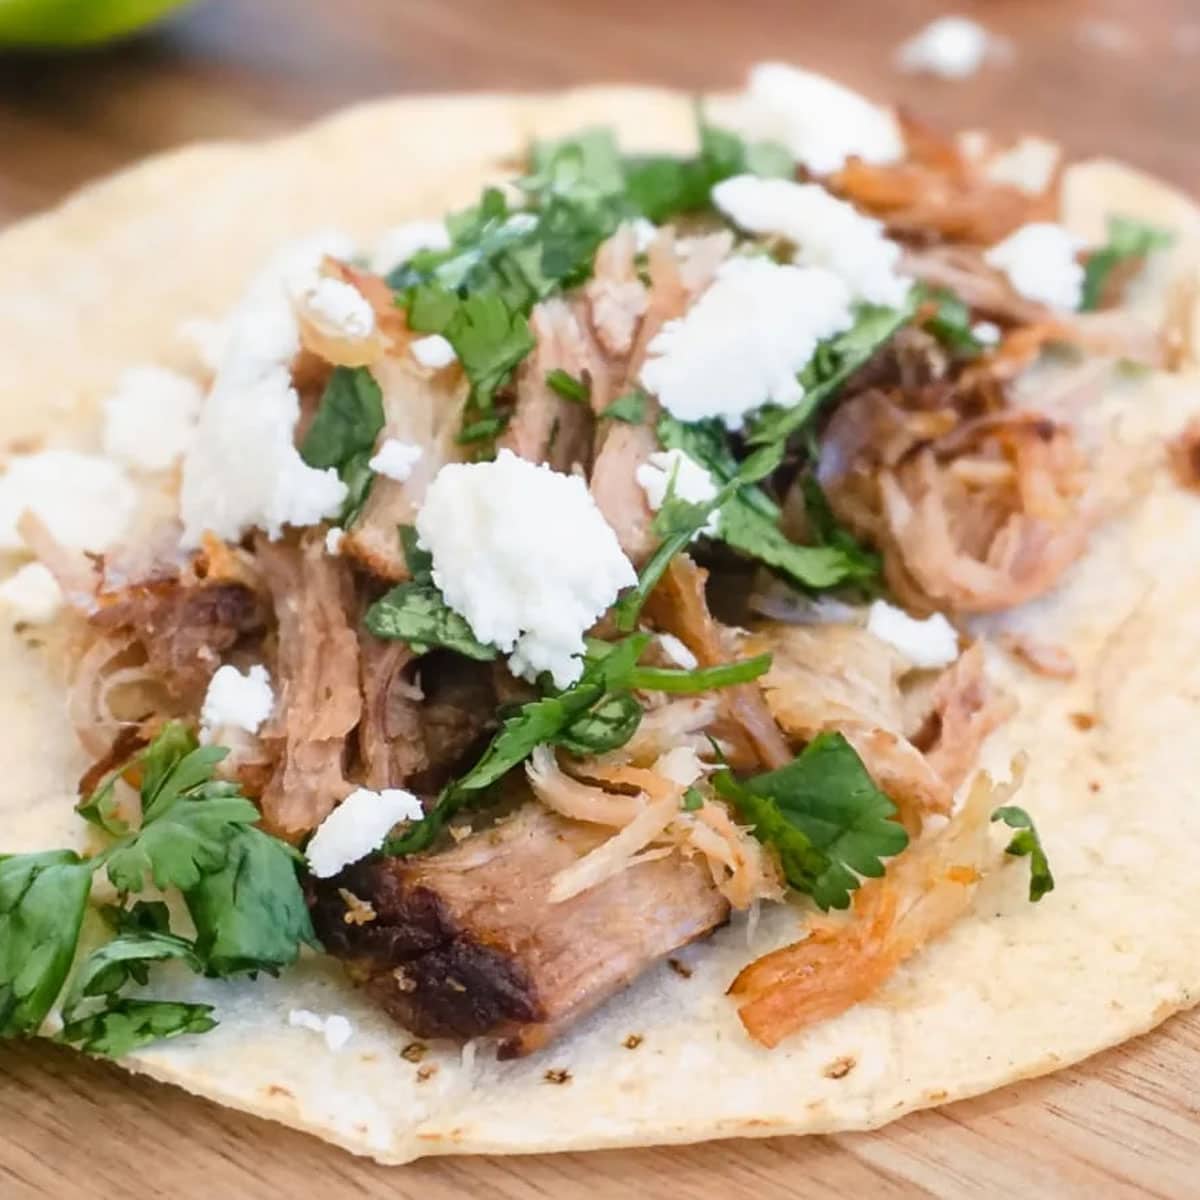 a corn tortilla topped with carnitas, crumbled cheese, and cilantro